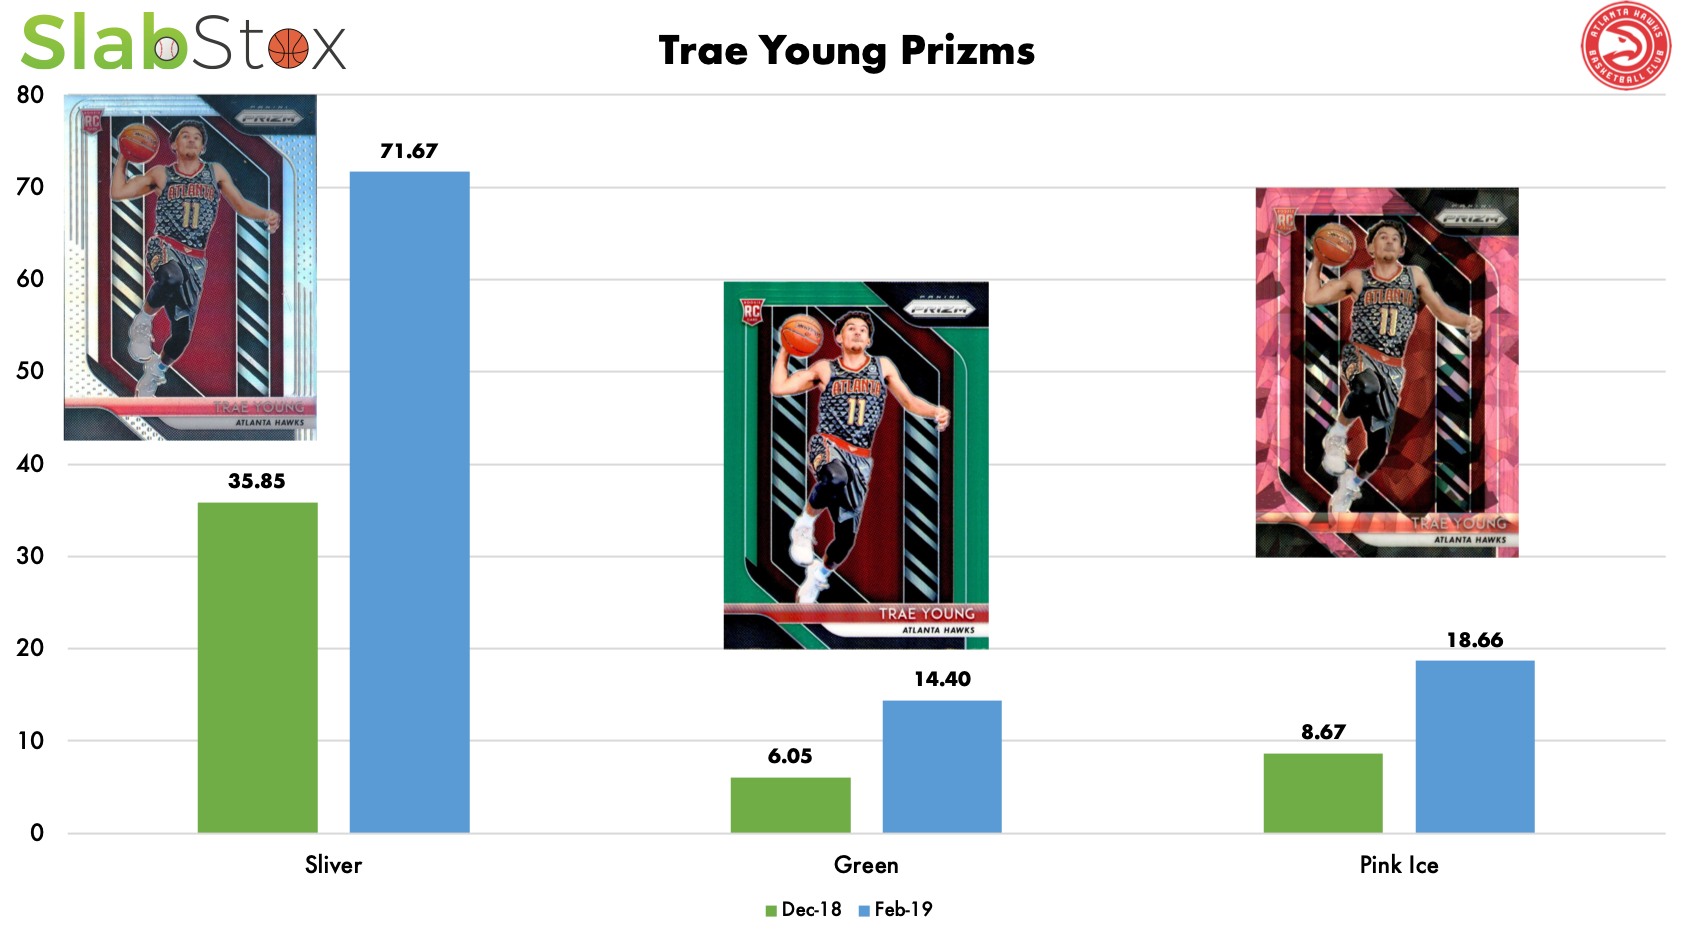 SlabStox infographic of Trae Young Prizms sports trading cards